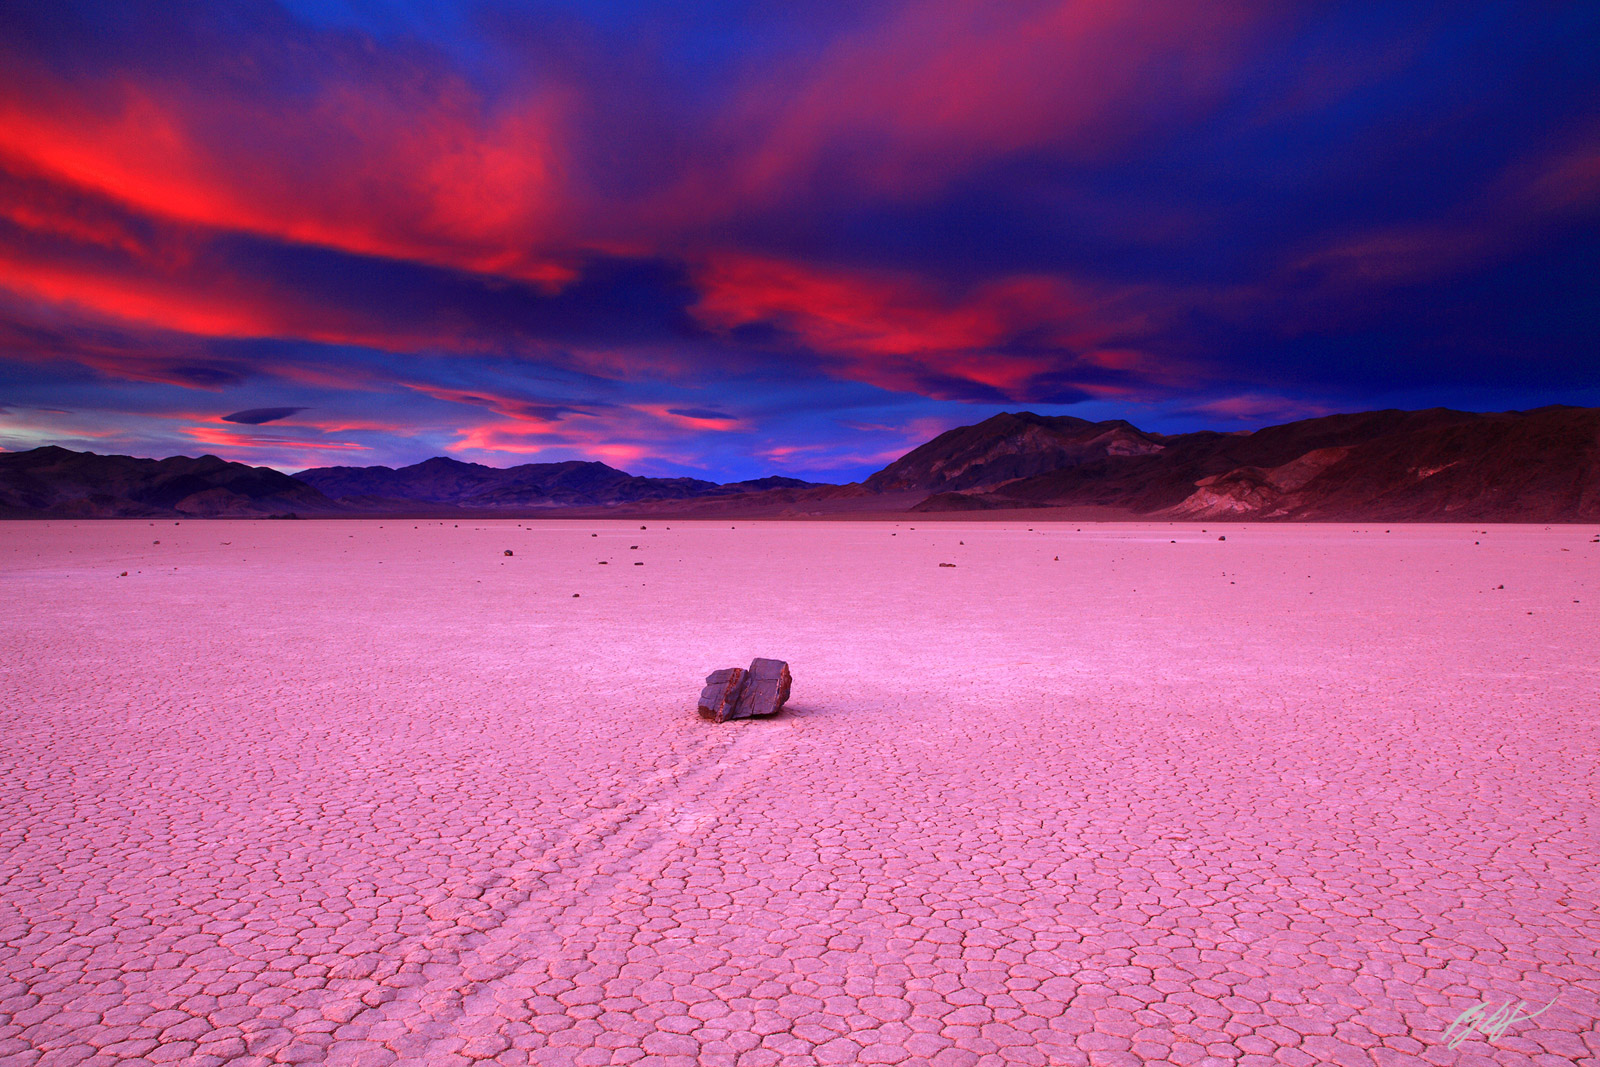 Sunset on the Racetrack in Death Valley National Park in California